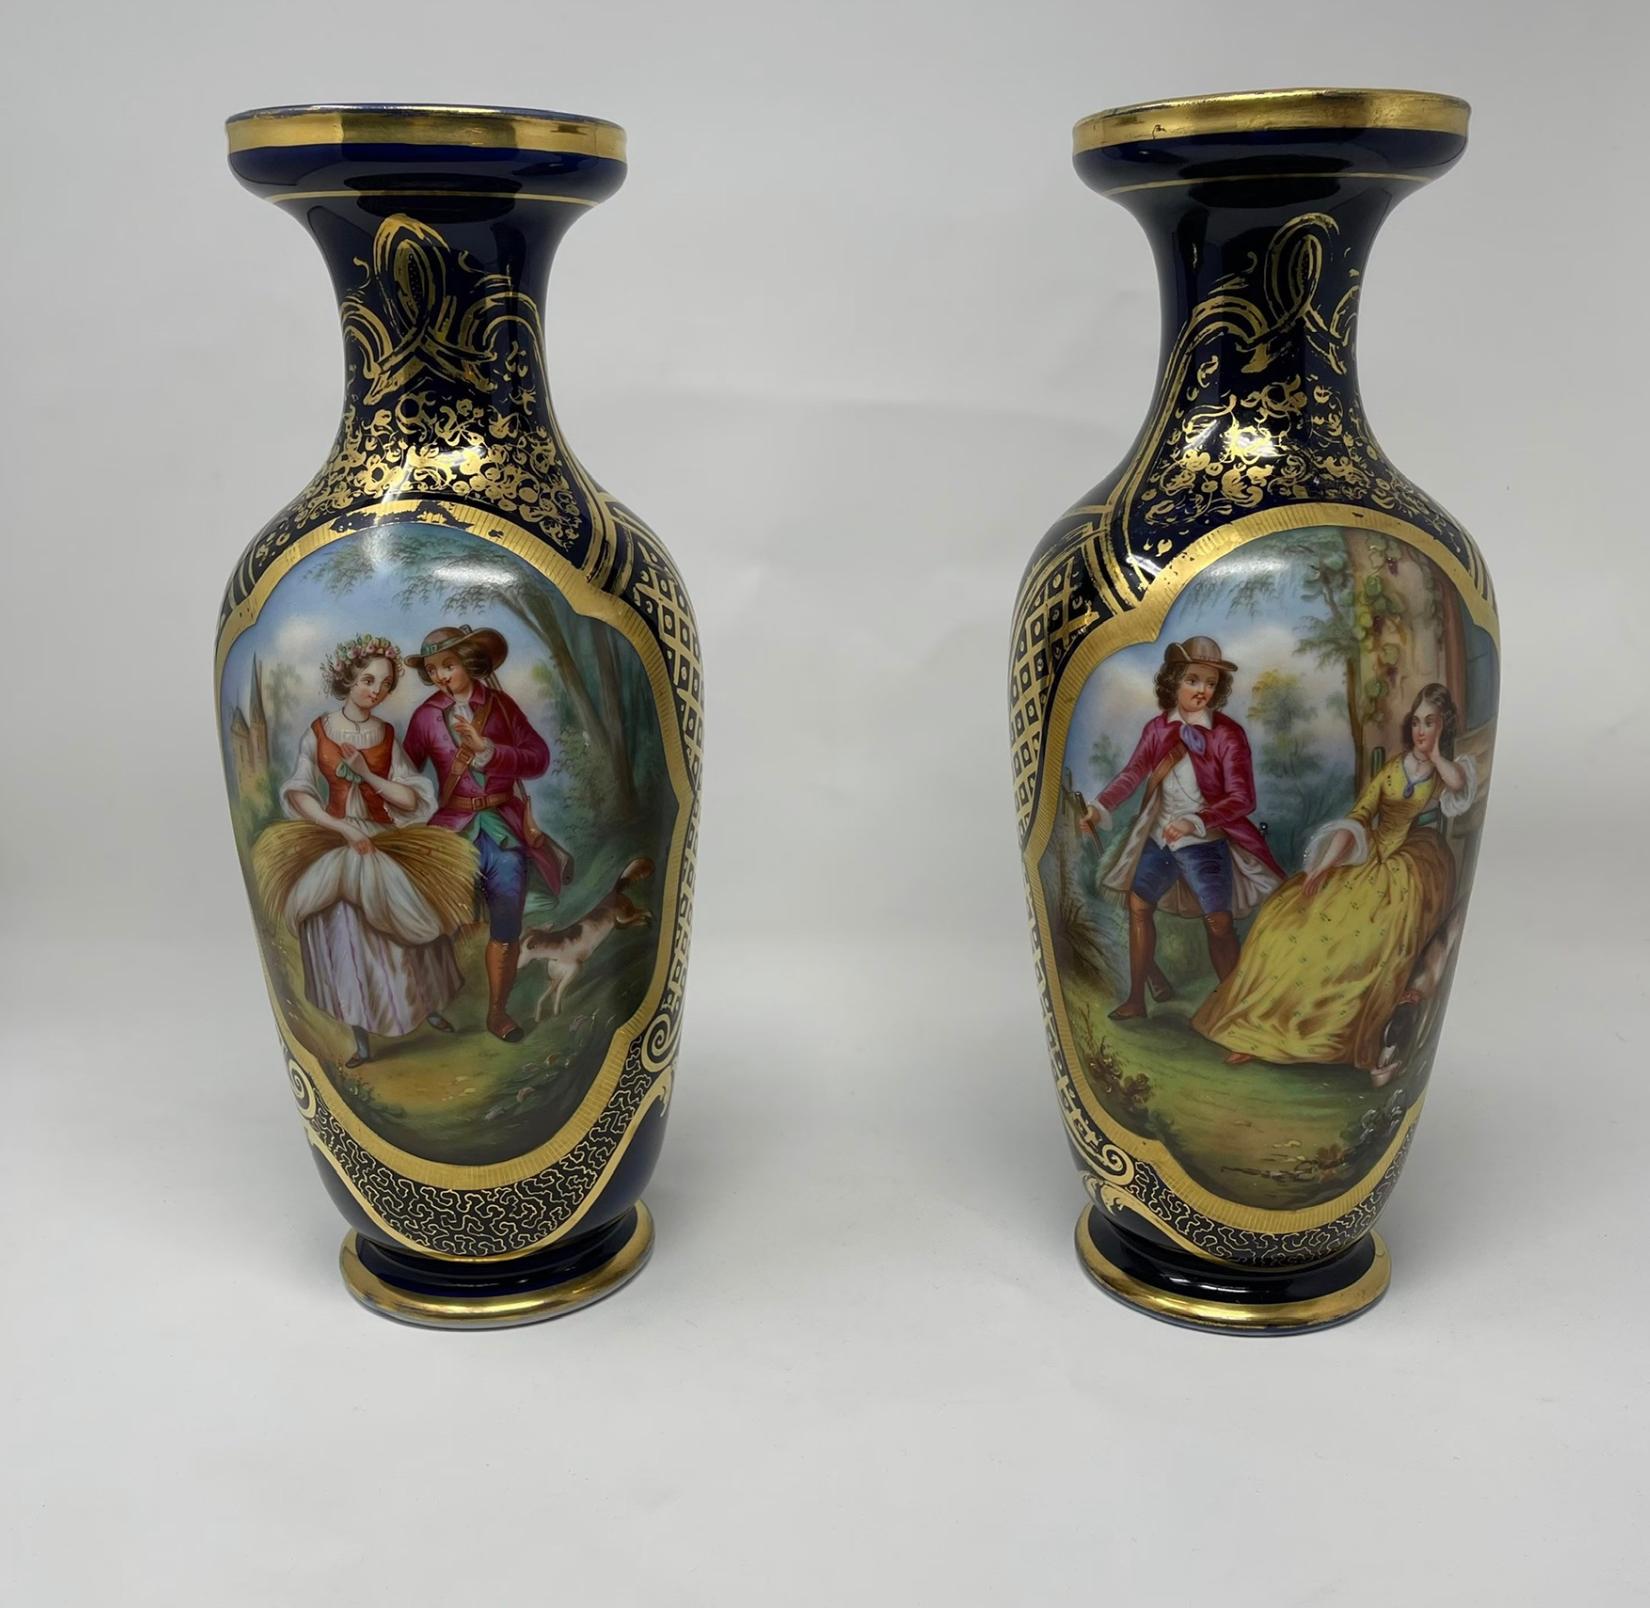 Antique French Gilded Porcelain Vases with Hand Painted Courting Scene - Pair For Sale 4